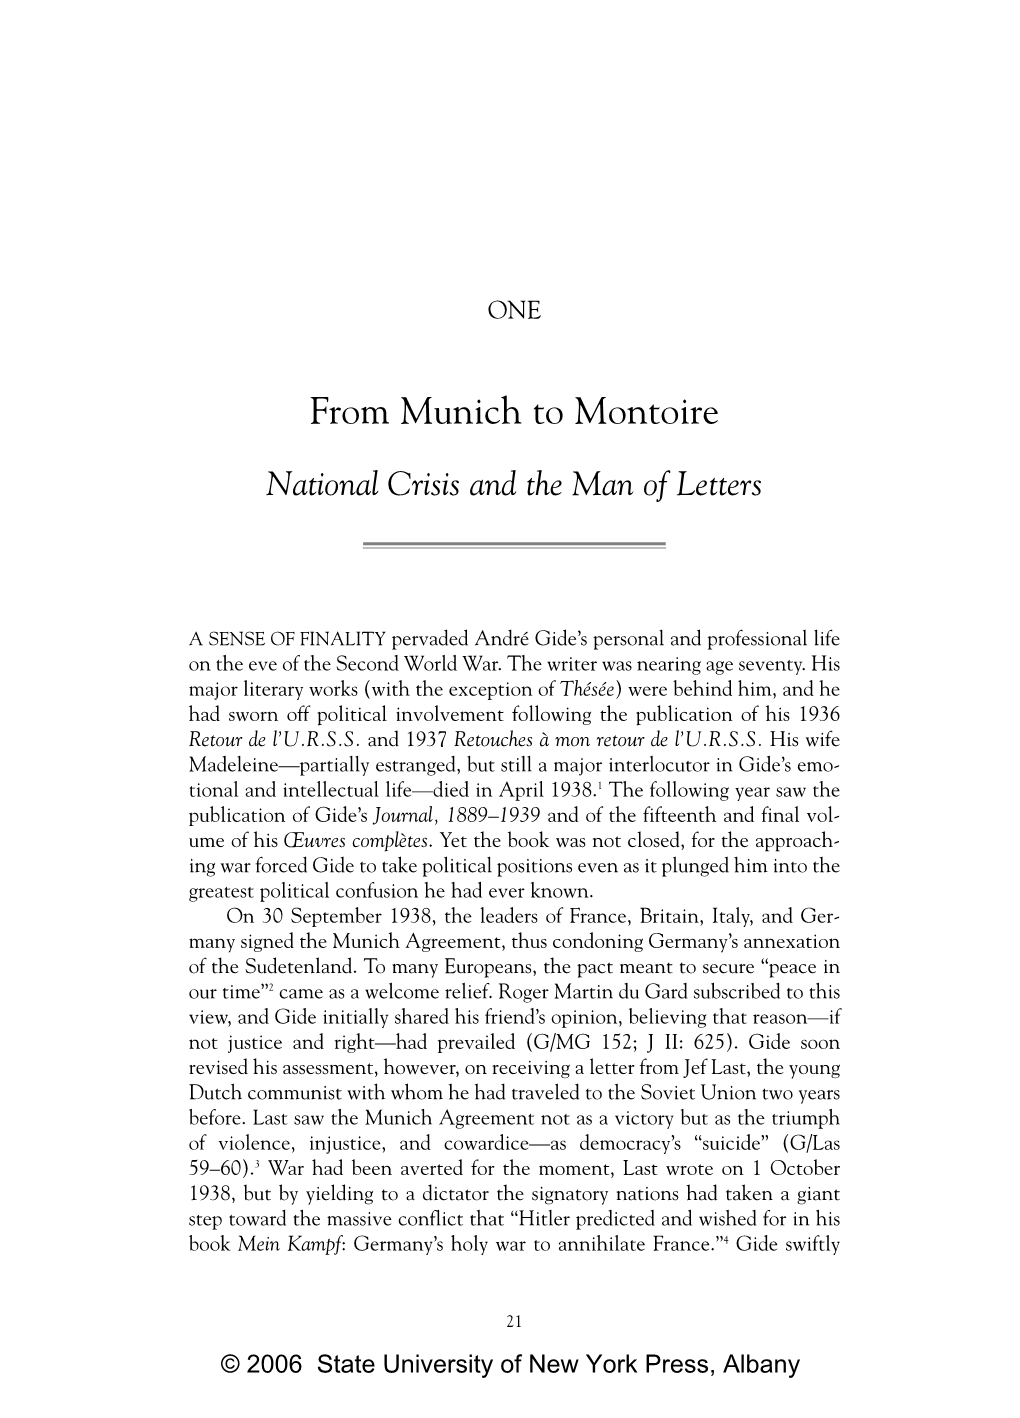 From Munich to Montoire